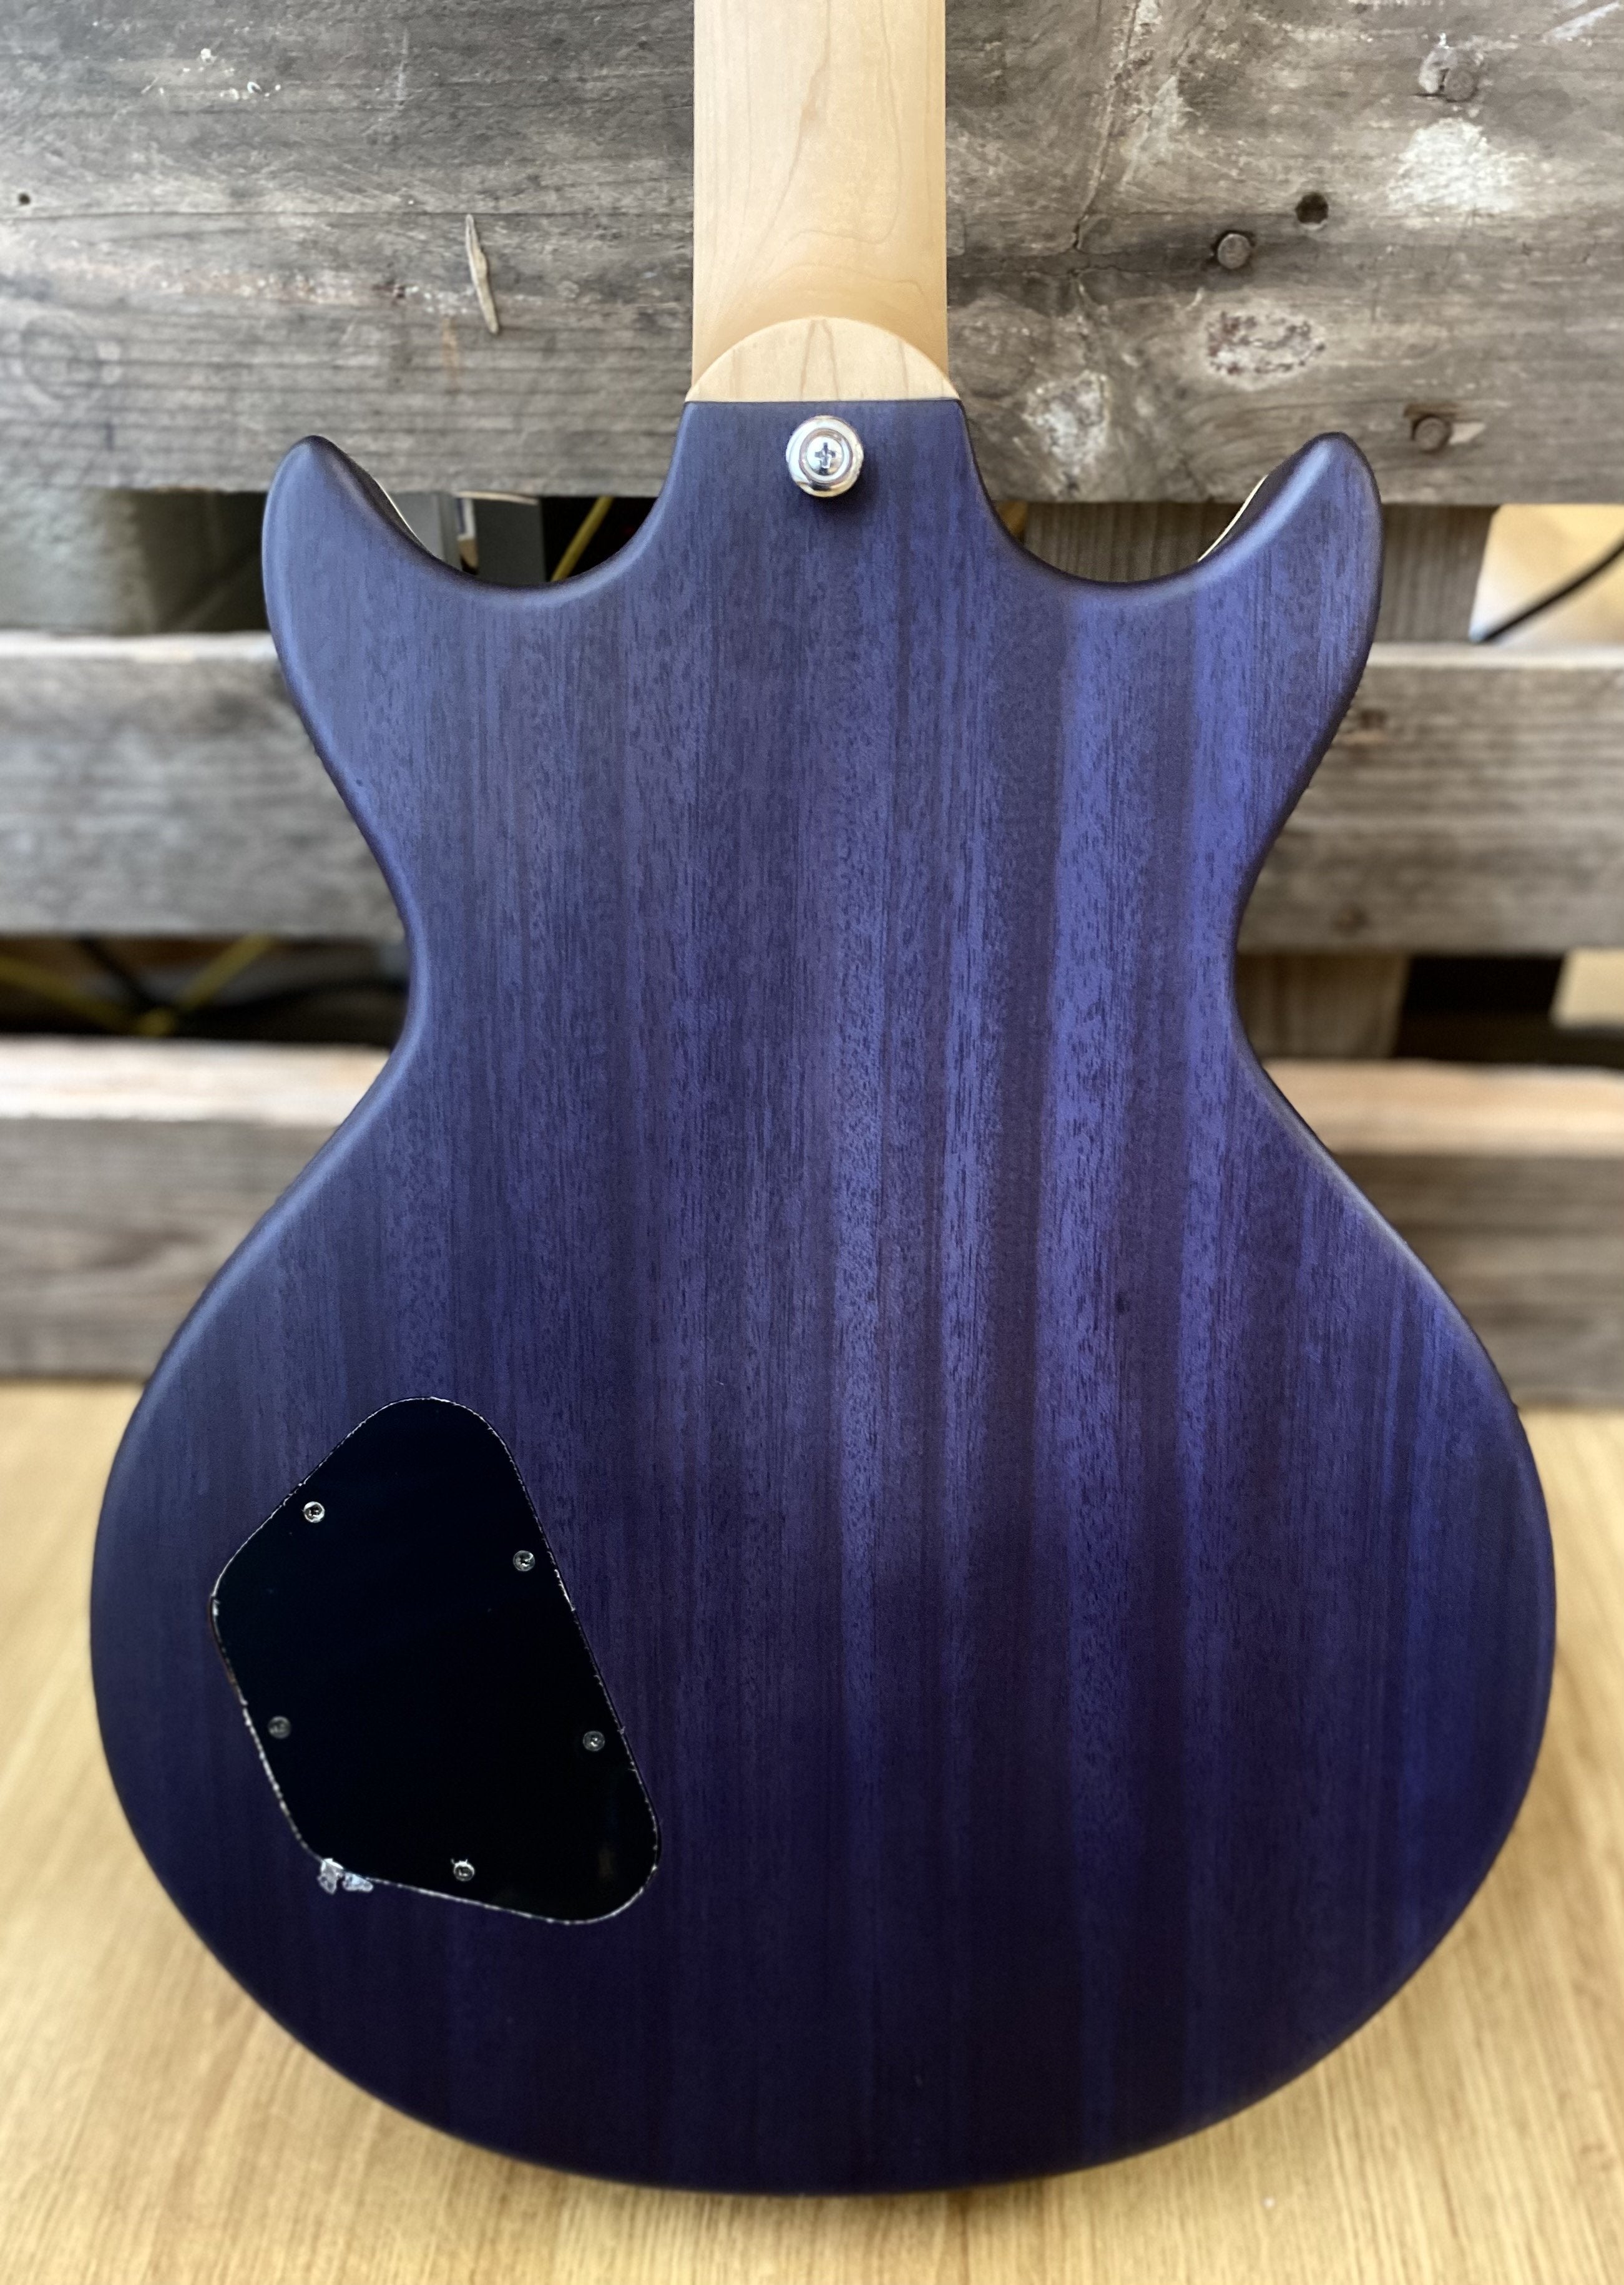 Gordon Smith GS Deluxe Trans Blue Maple Neck, Electric Guitar for sale at Richards Guitars.